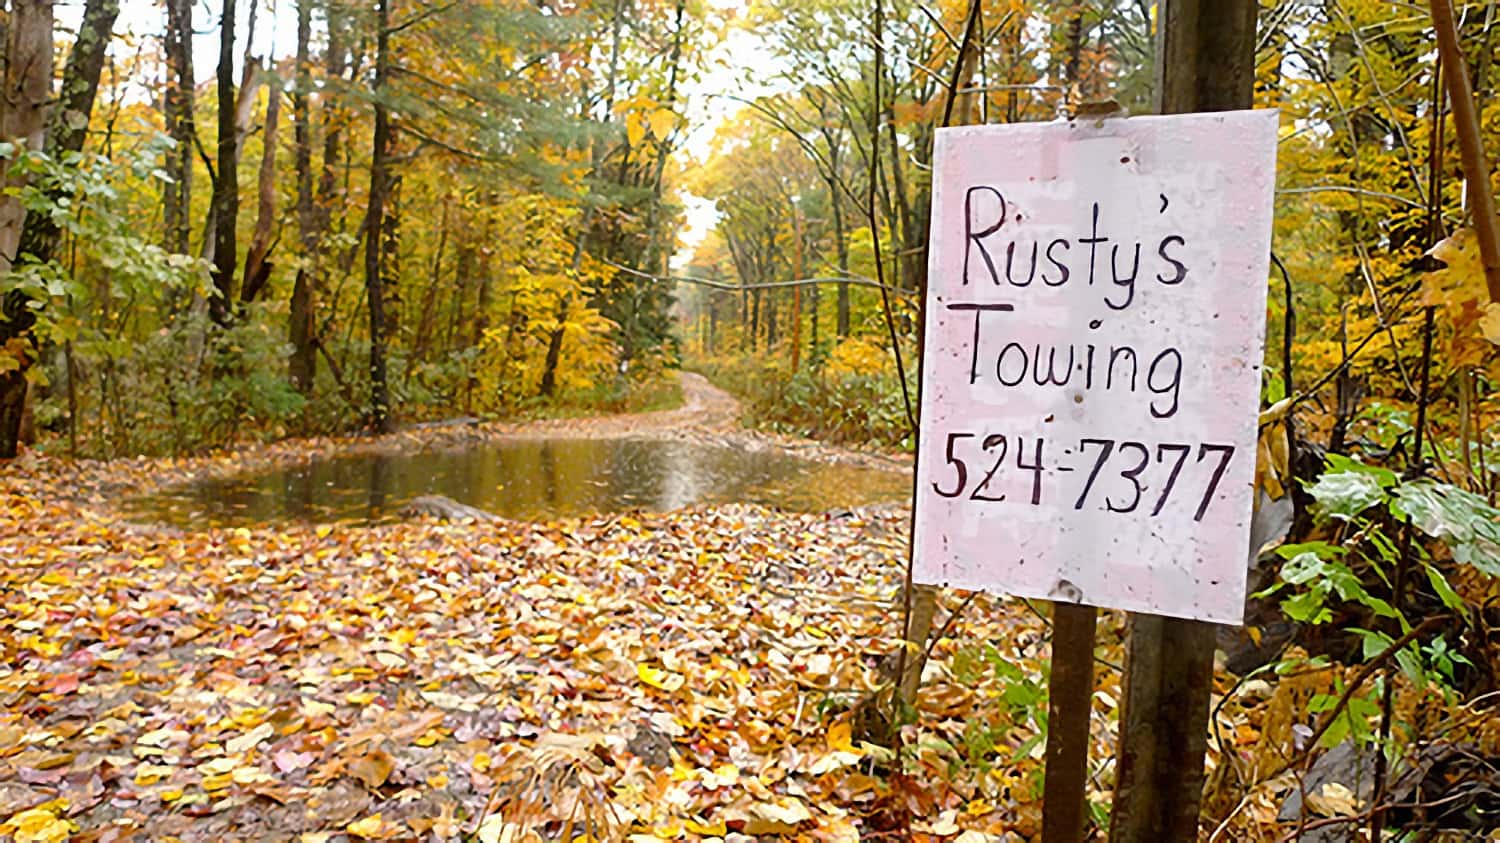 Rusty&rsquo;s Towing. Source.